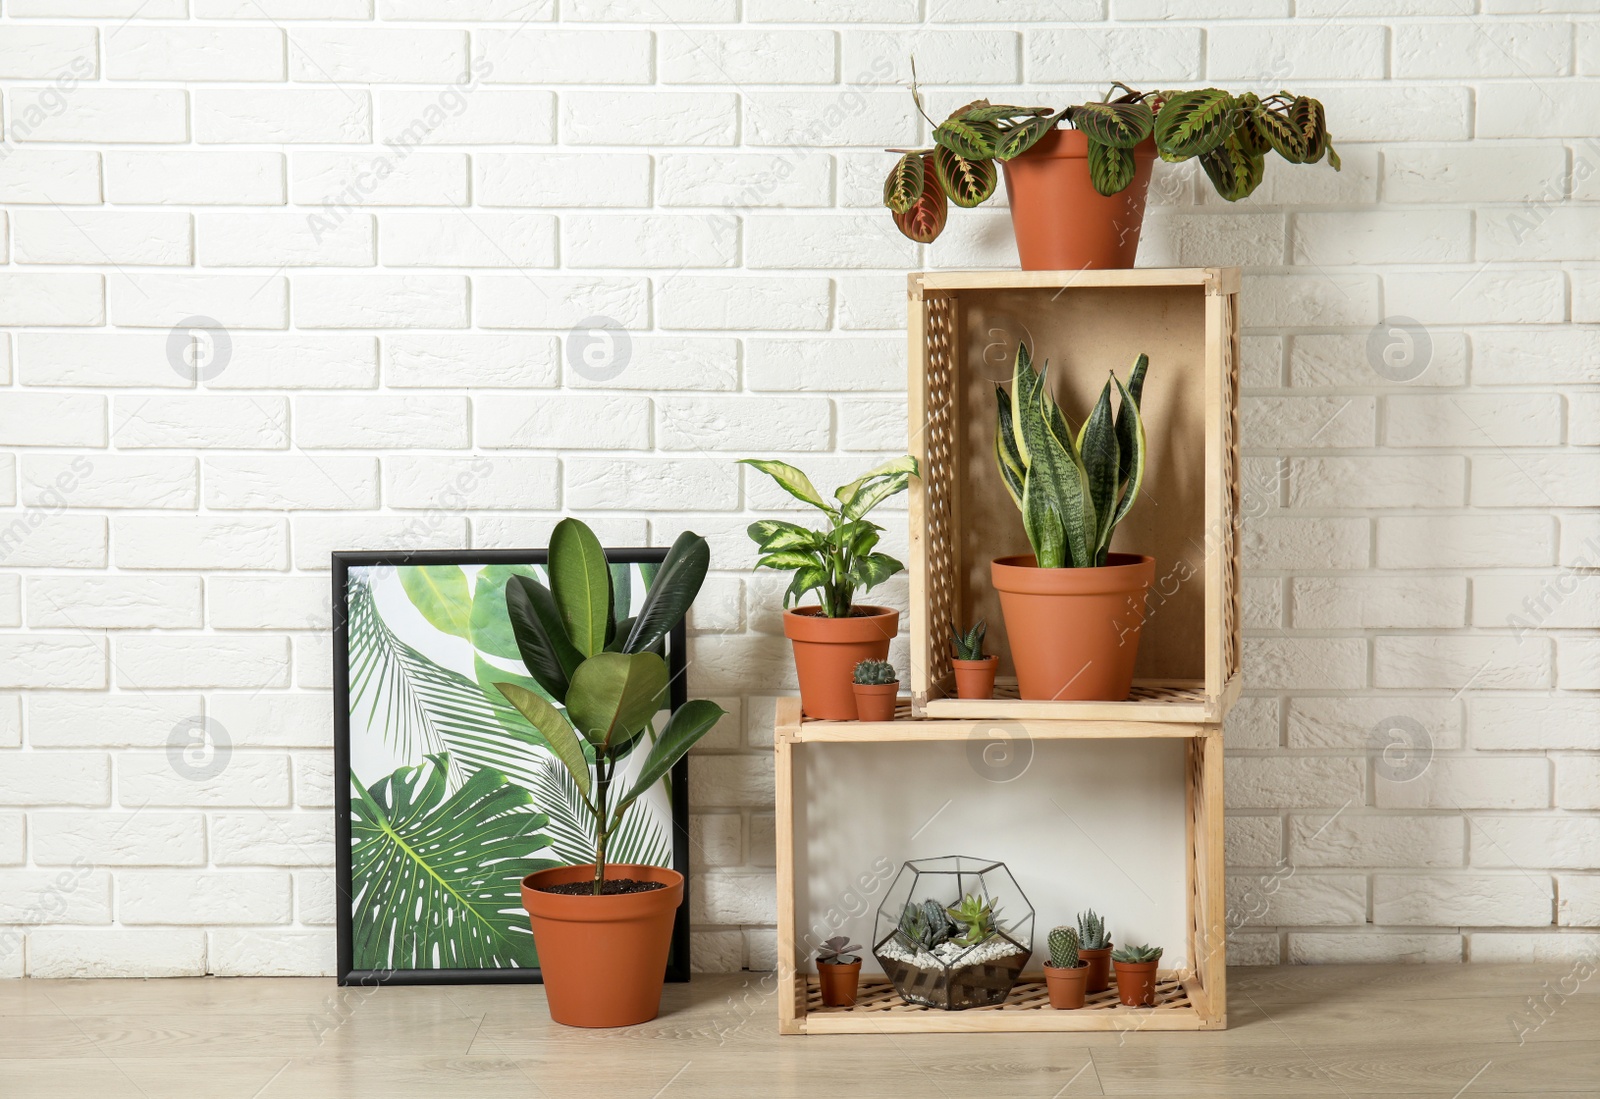 Photo of Potted home plants and wooden crates on floor indoors. Idea for interior decor